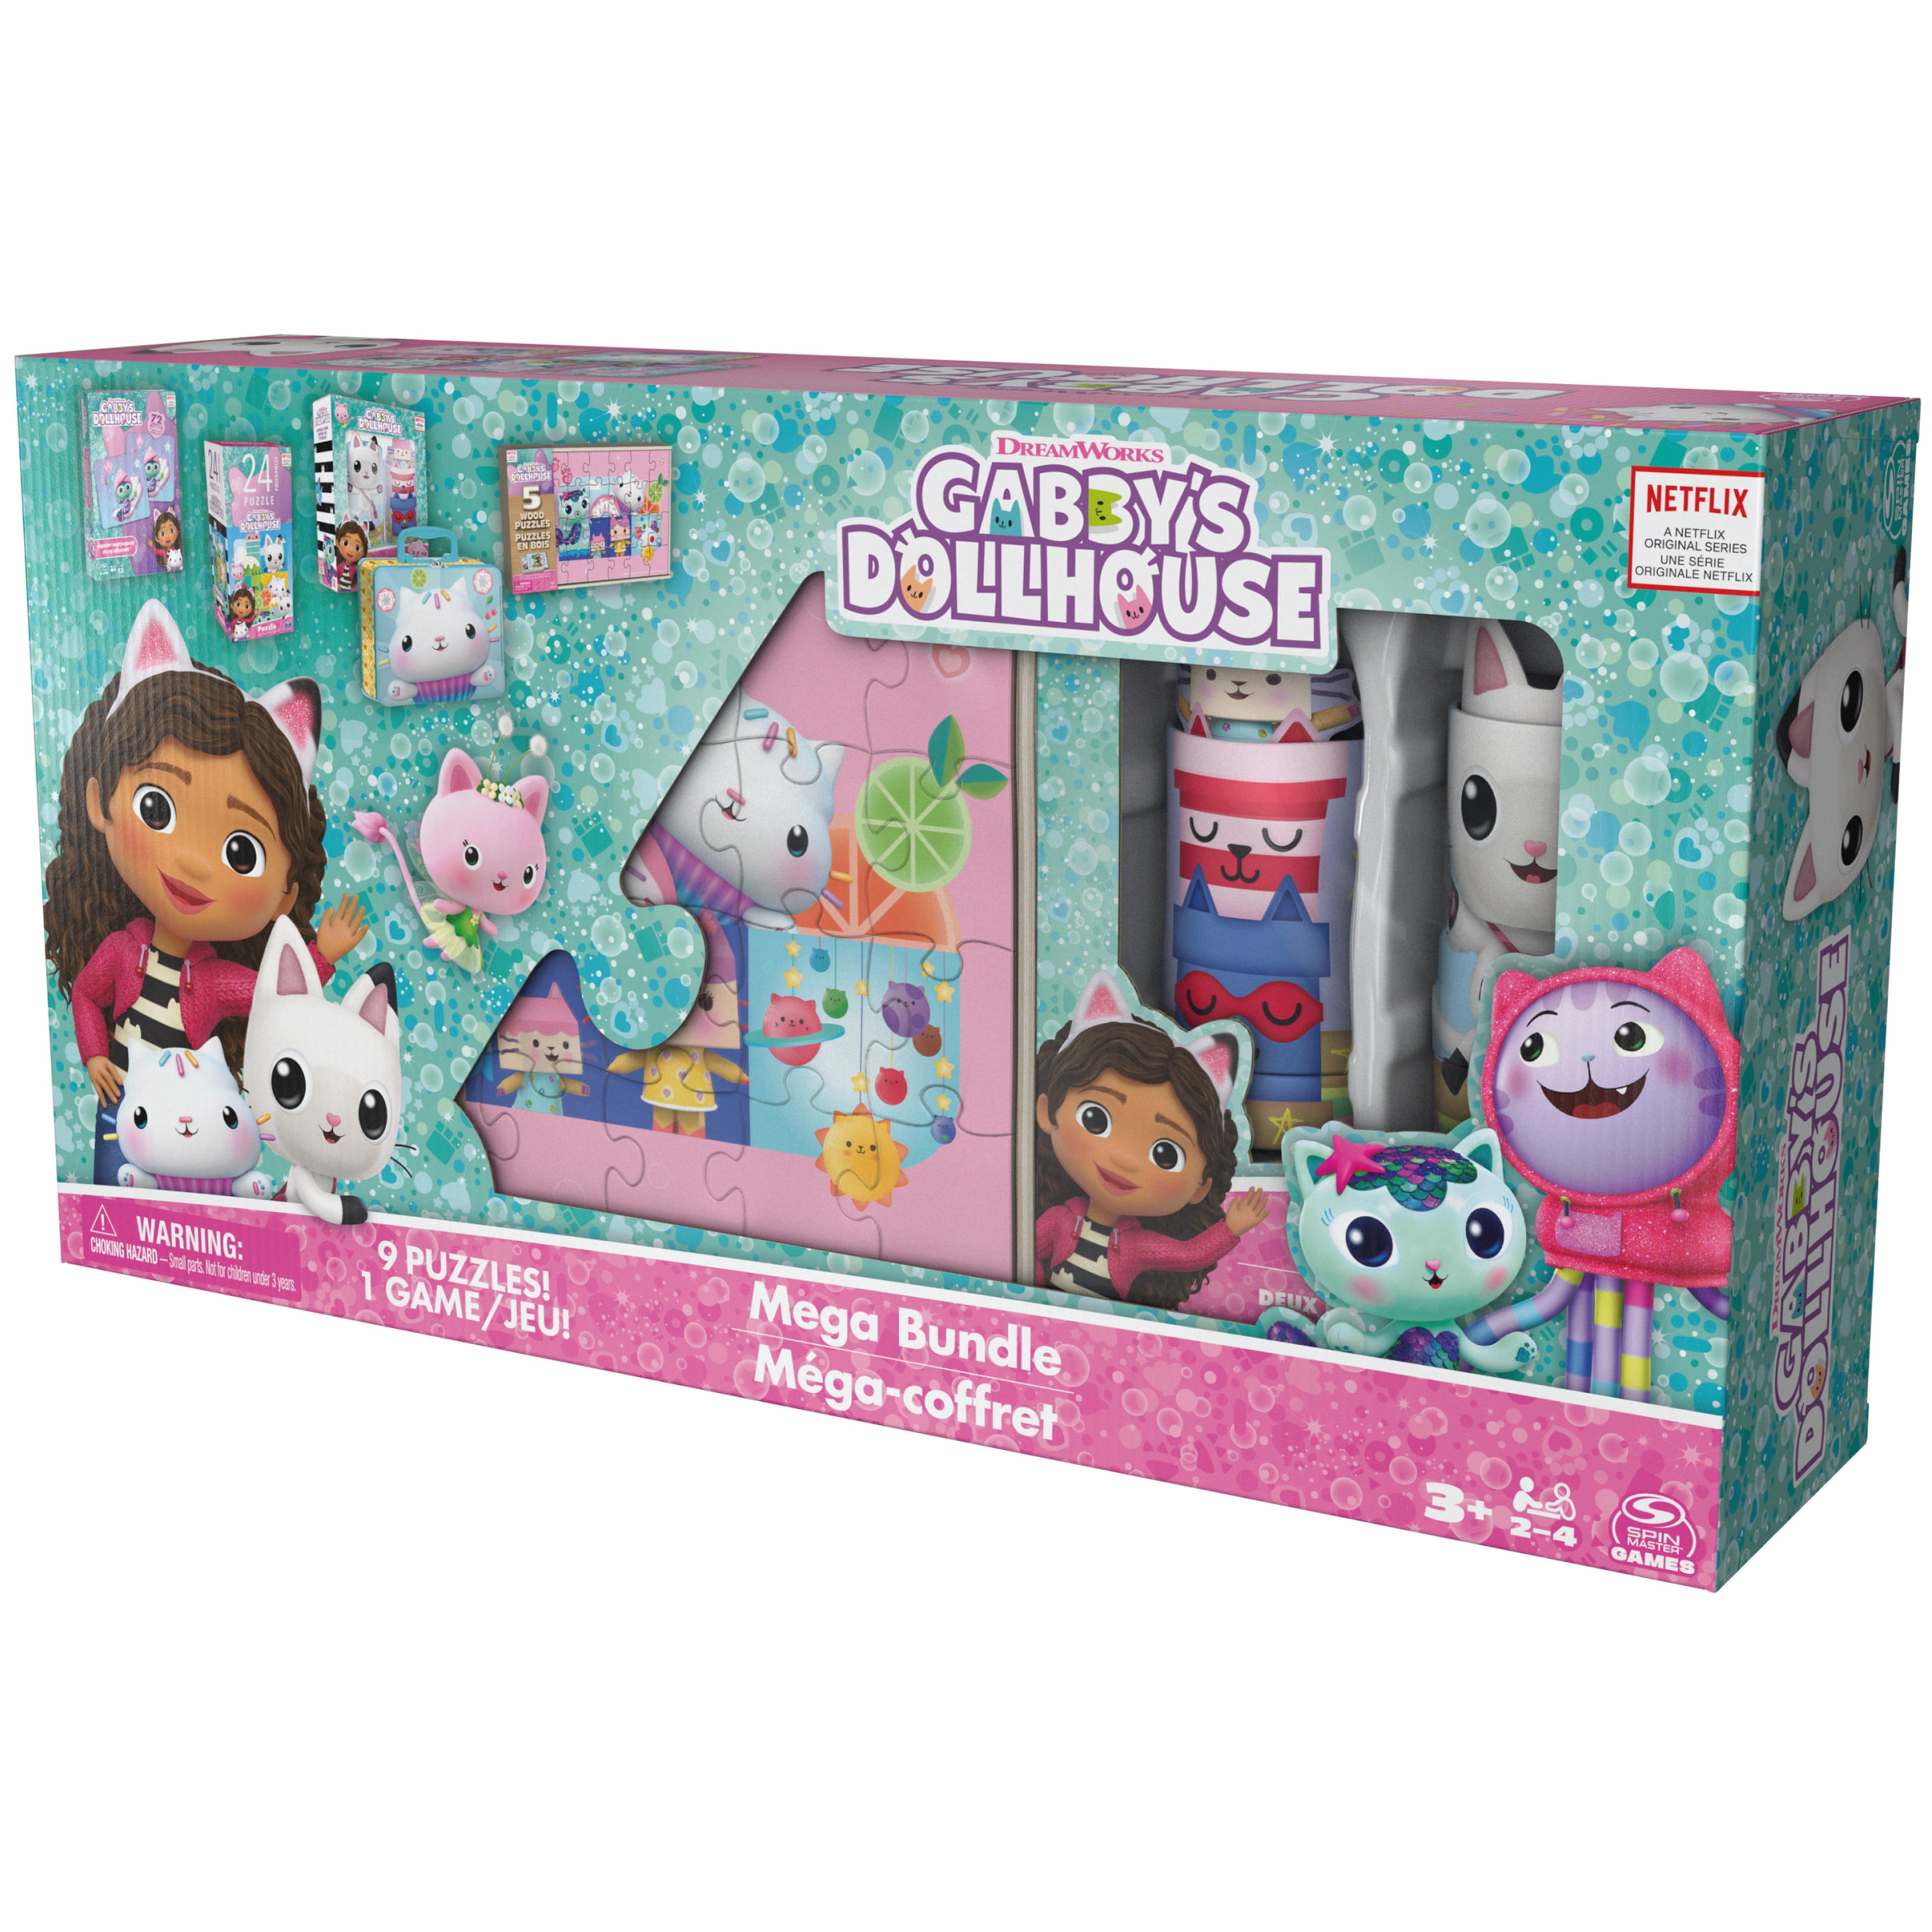 Gabby's Dollhouse, 9 Puzzles with Matching Game, for Kids Ages 3 and up 